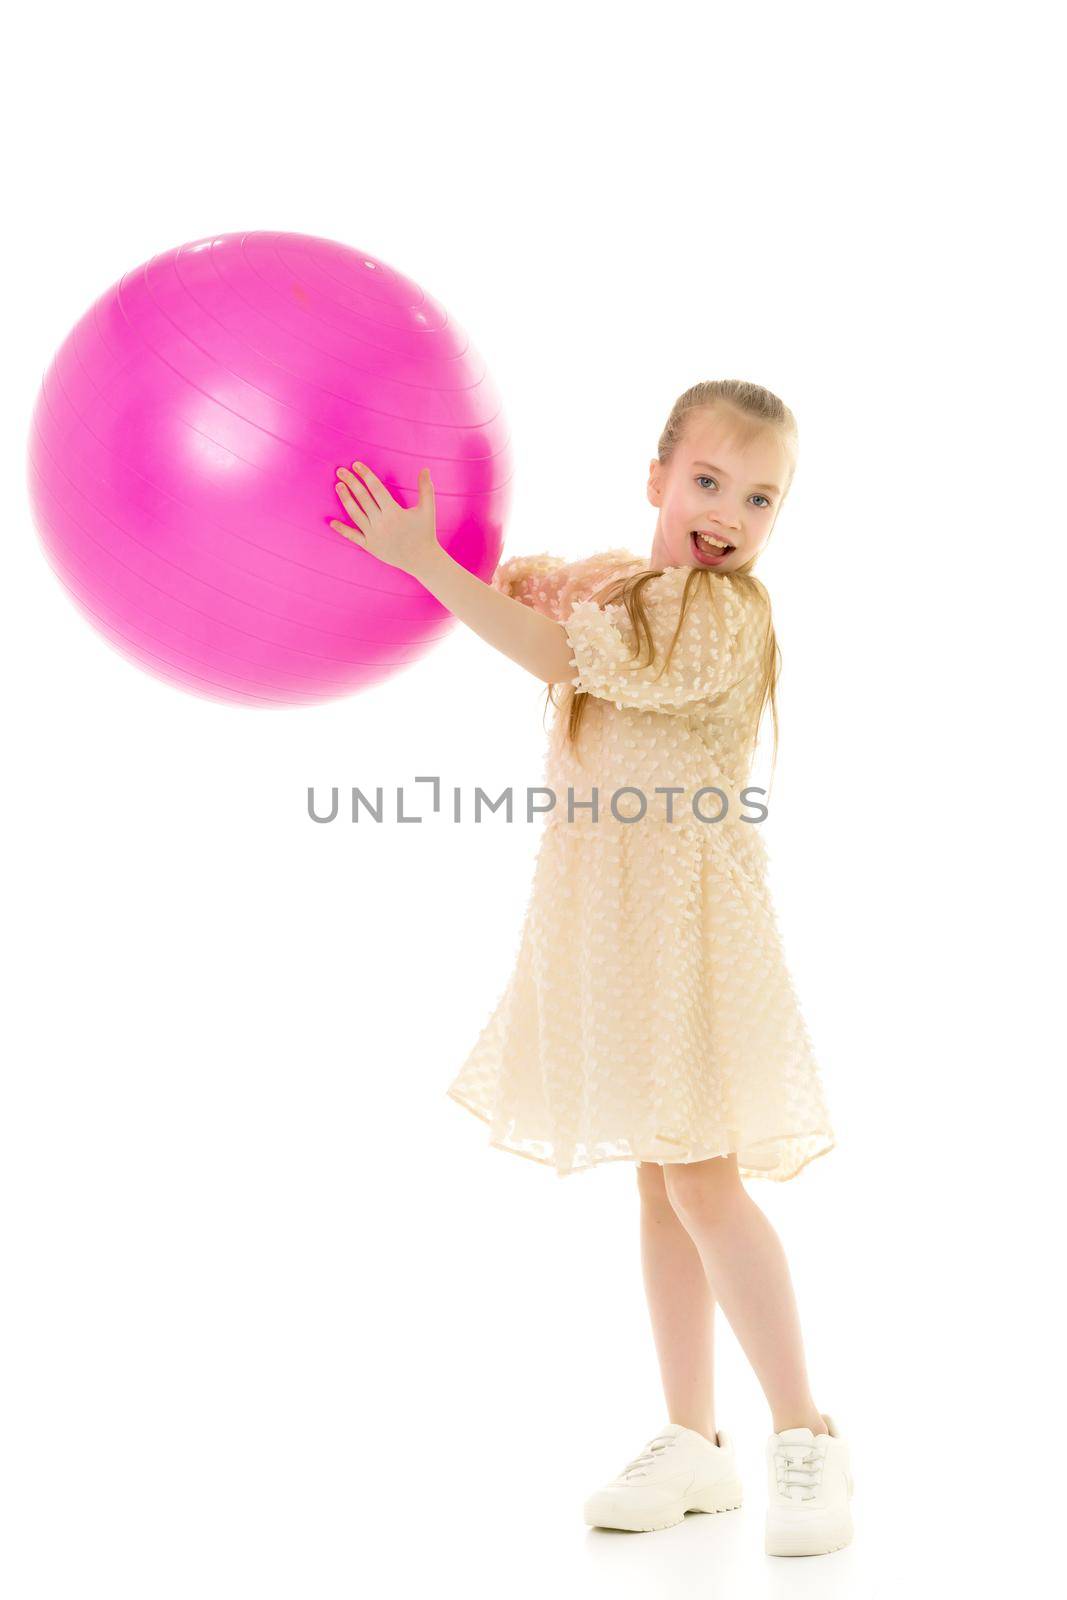 Beautiful little girl is playing with a big ball for fitness. Sports concept, happy childhood. Isolated over white background.